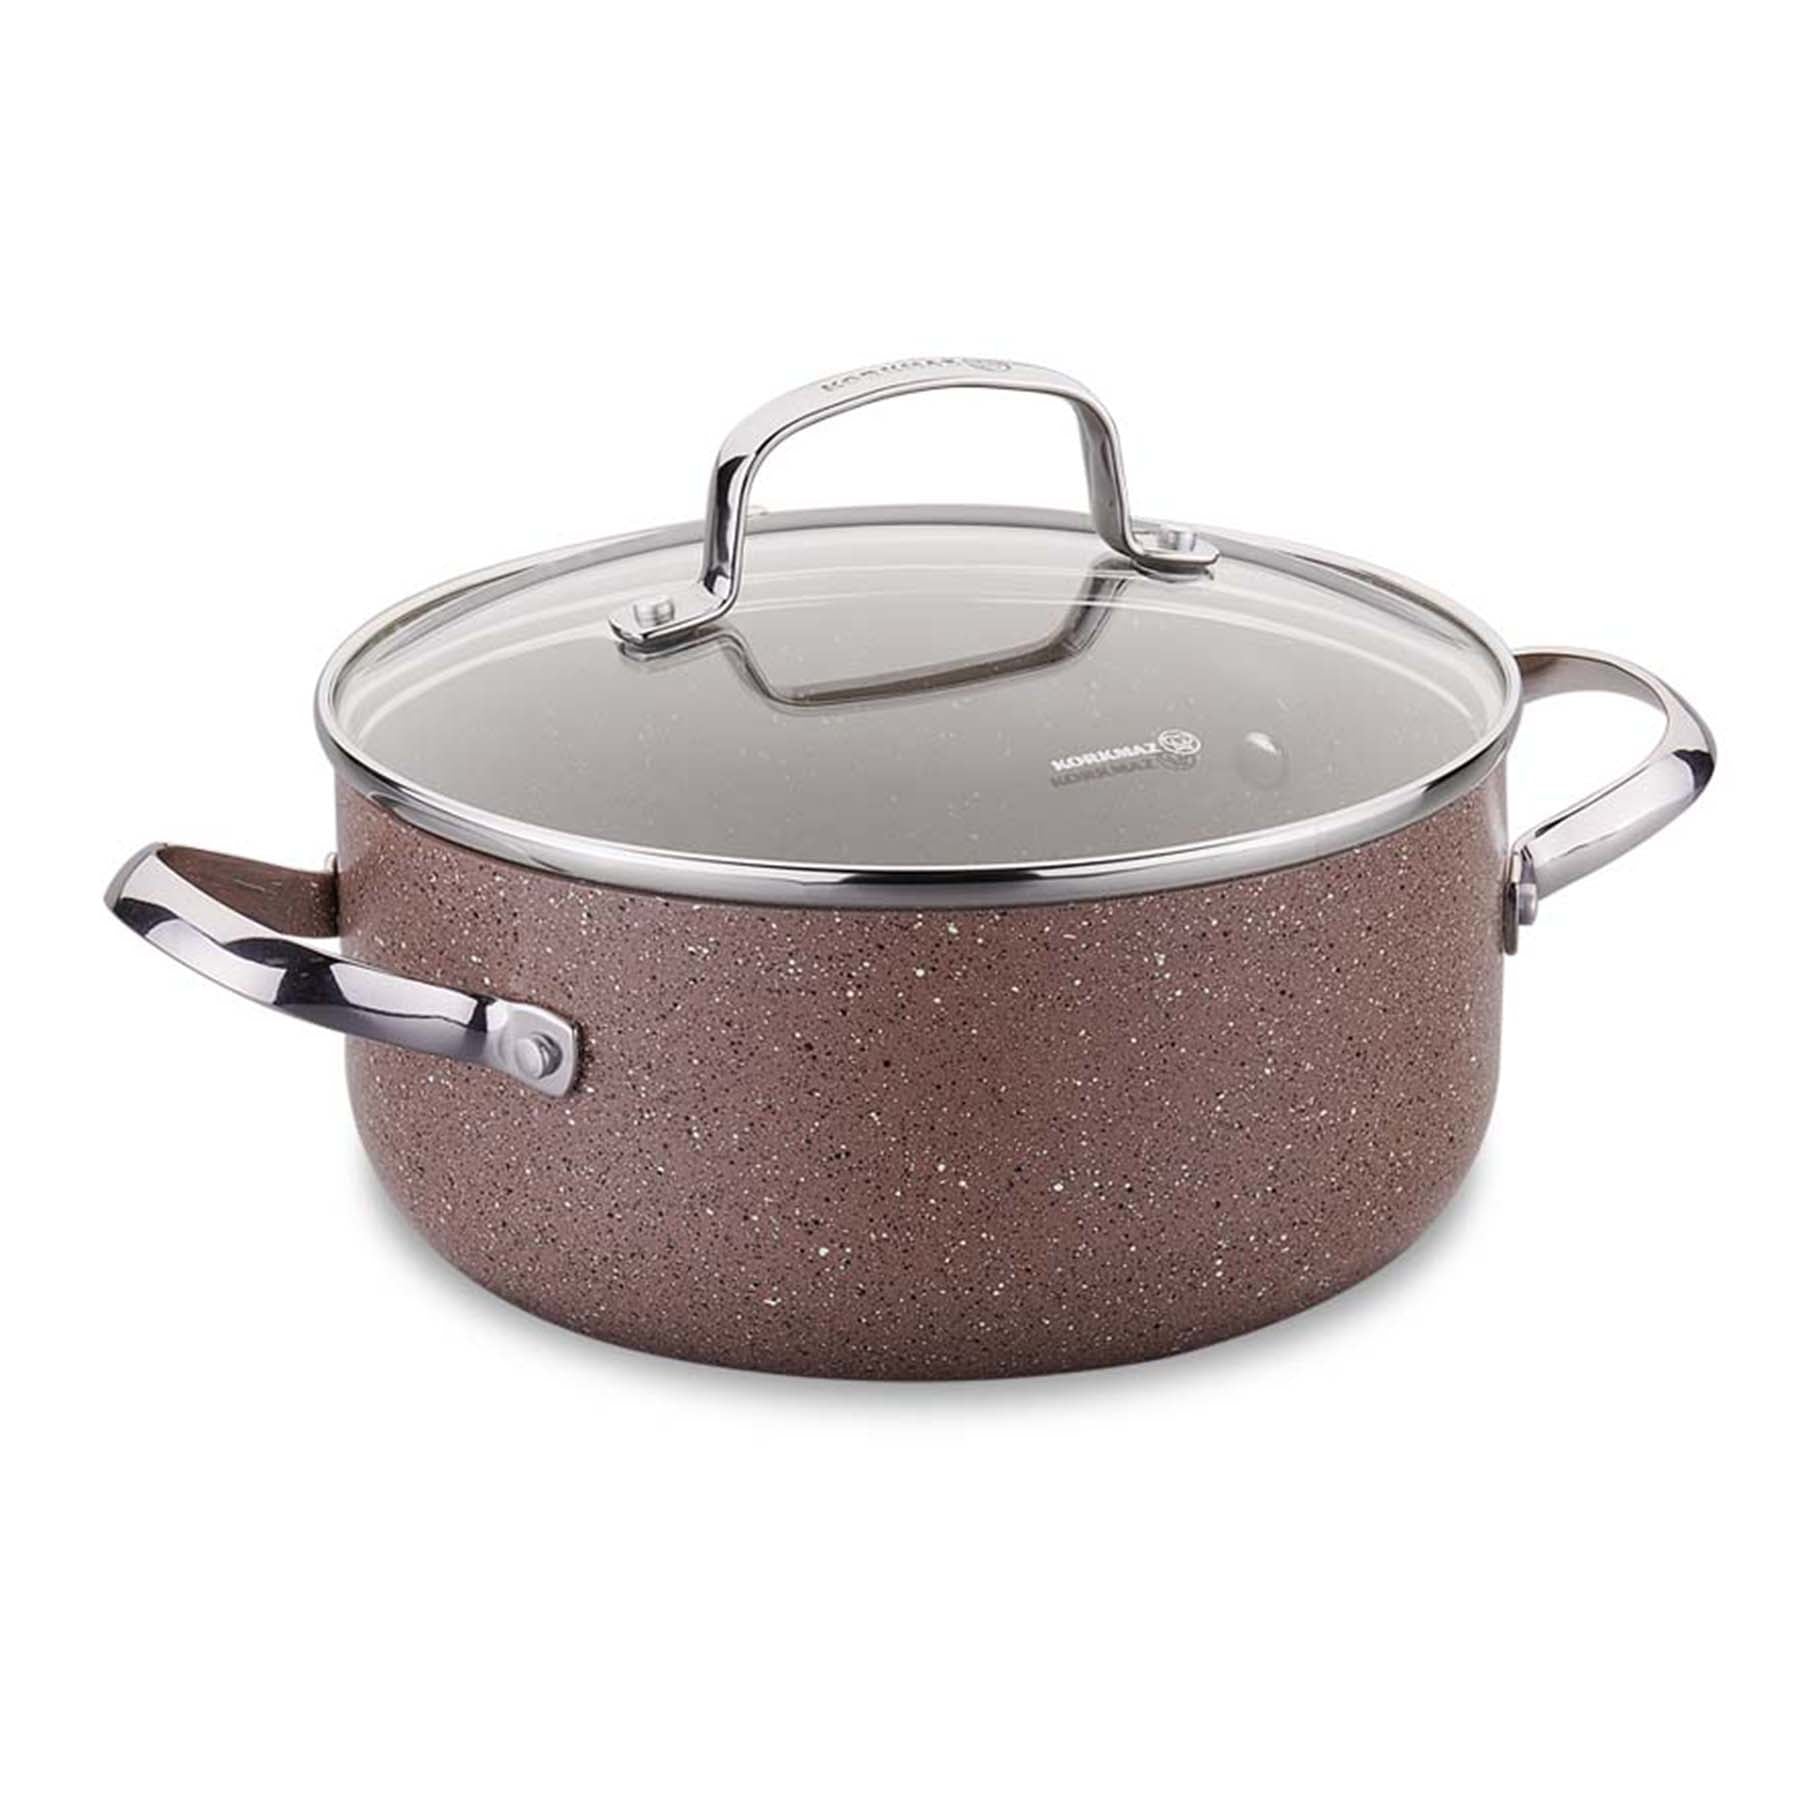 Casserole with lid, Beige